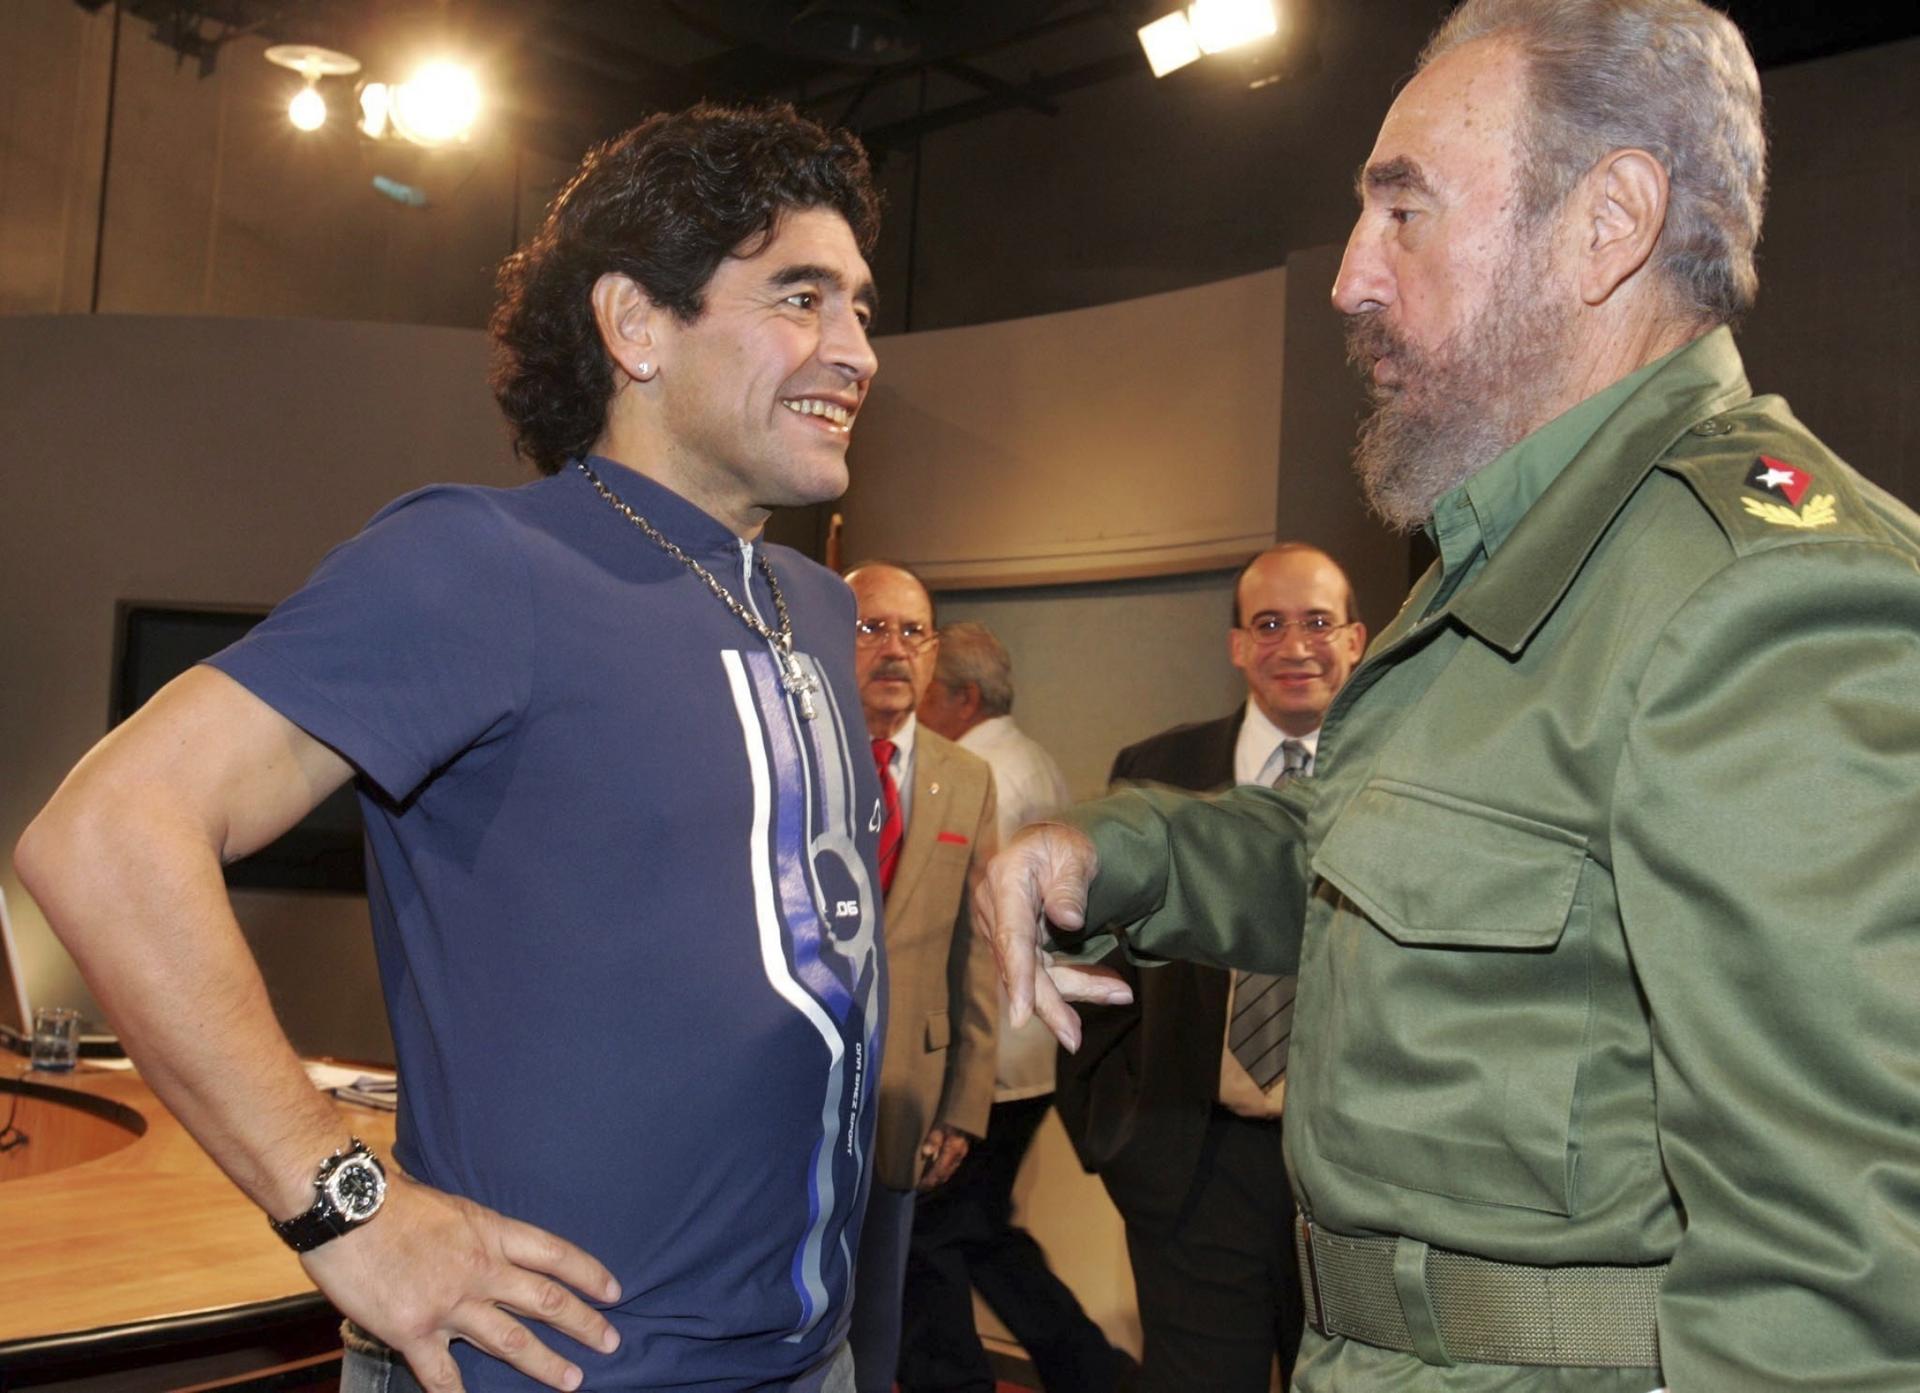 In this Oct. 27, 2005 file photo released by the Cuban government's National Information Agency (AIN), Cuban President Fidel Castro, right, meets Argentina's former soccer star Diego Maradona on the program "Mesa Redonda" in Havana, Cuba.